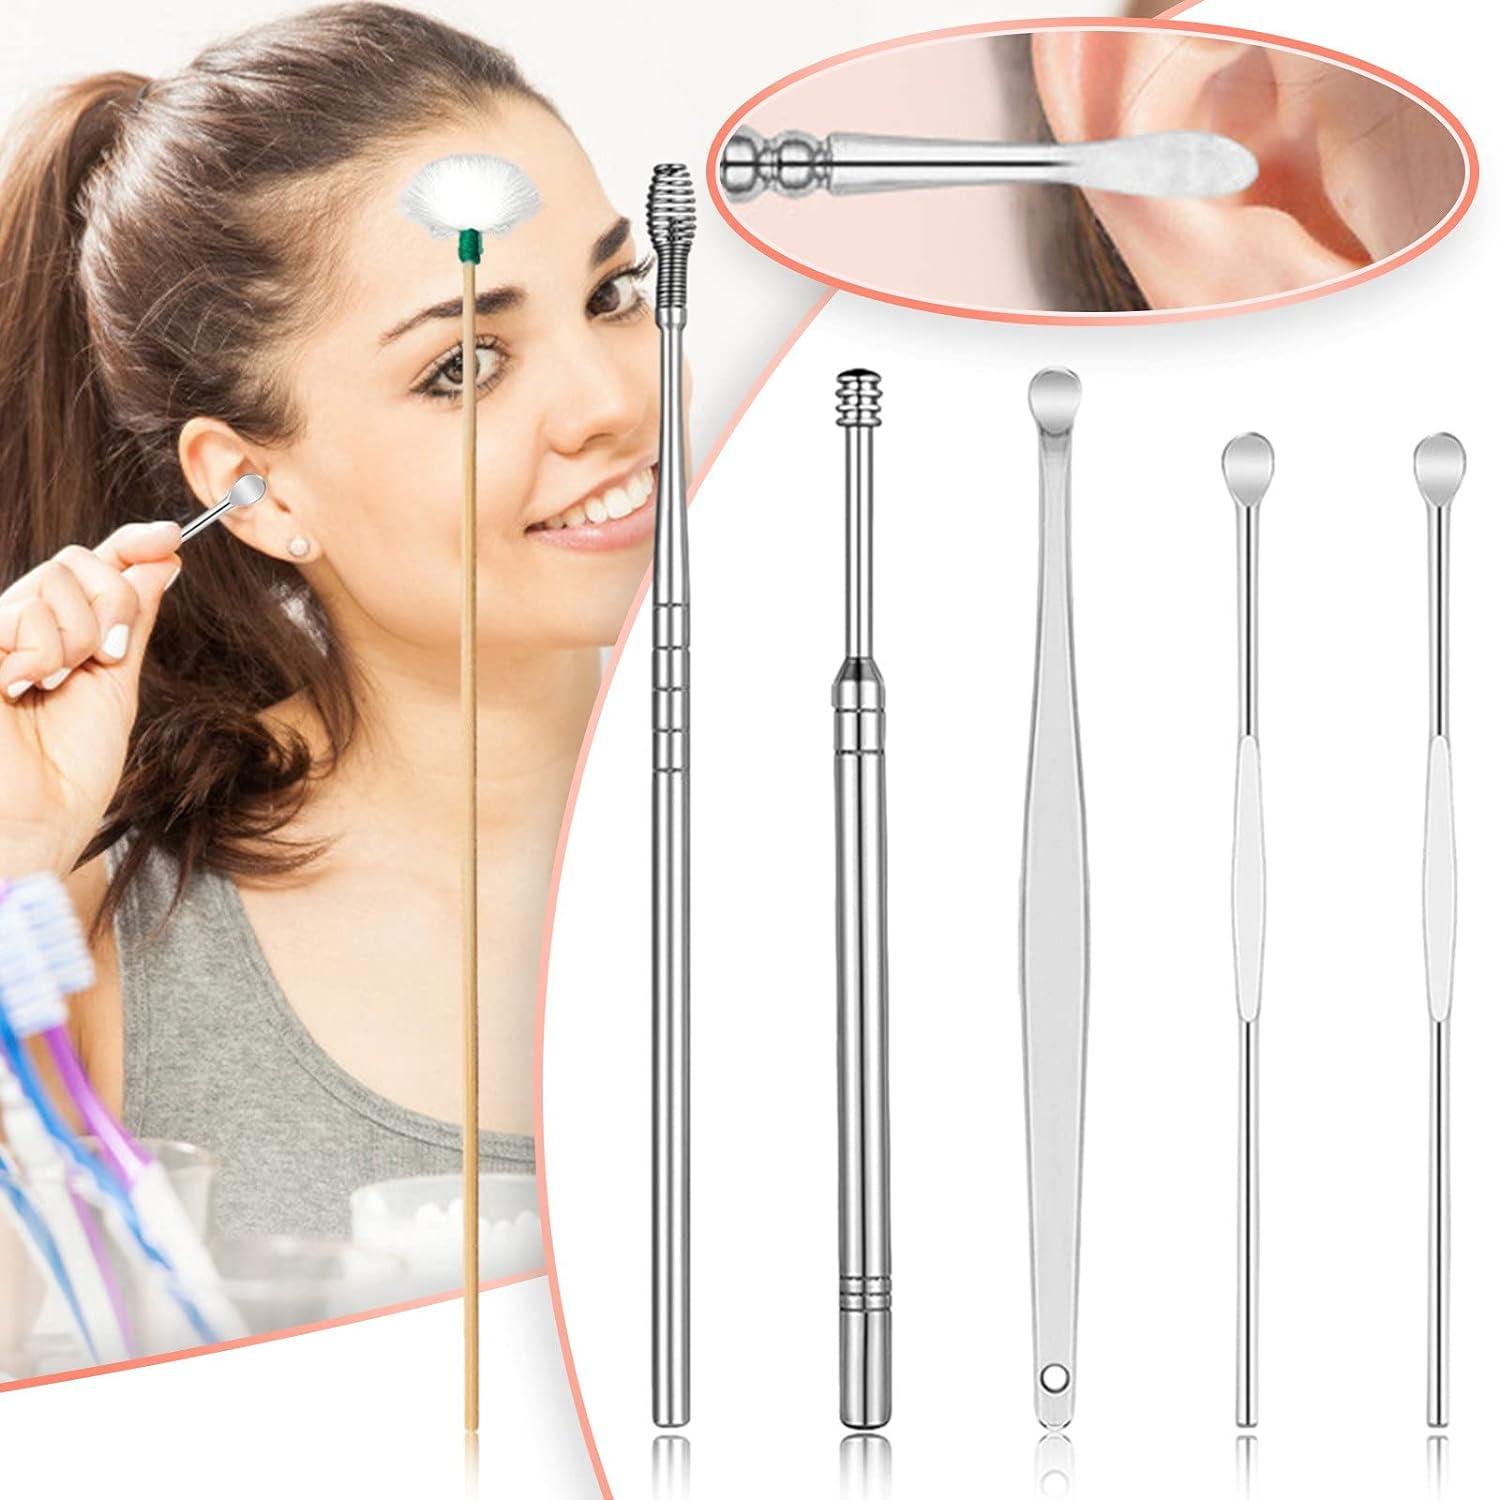 Ear Cleaning Tools kit Ear Wax Cleaner Earwax Remover Stick Set Spring  Curette